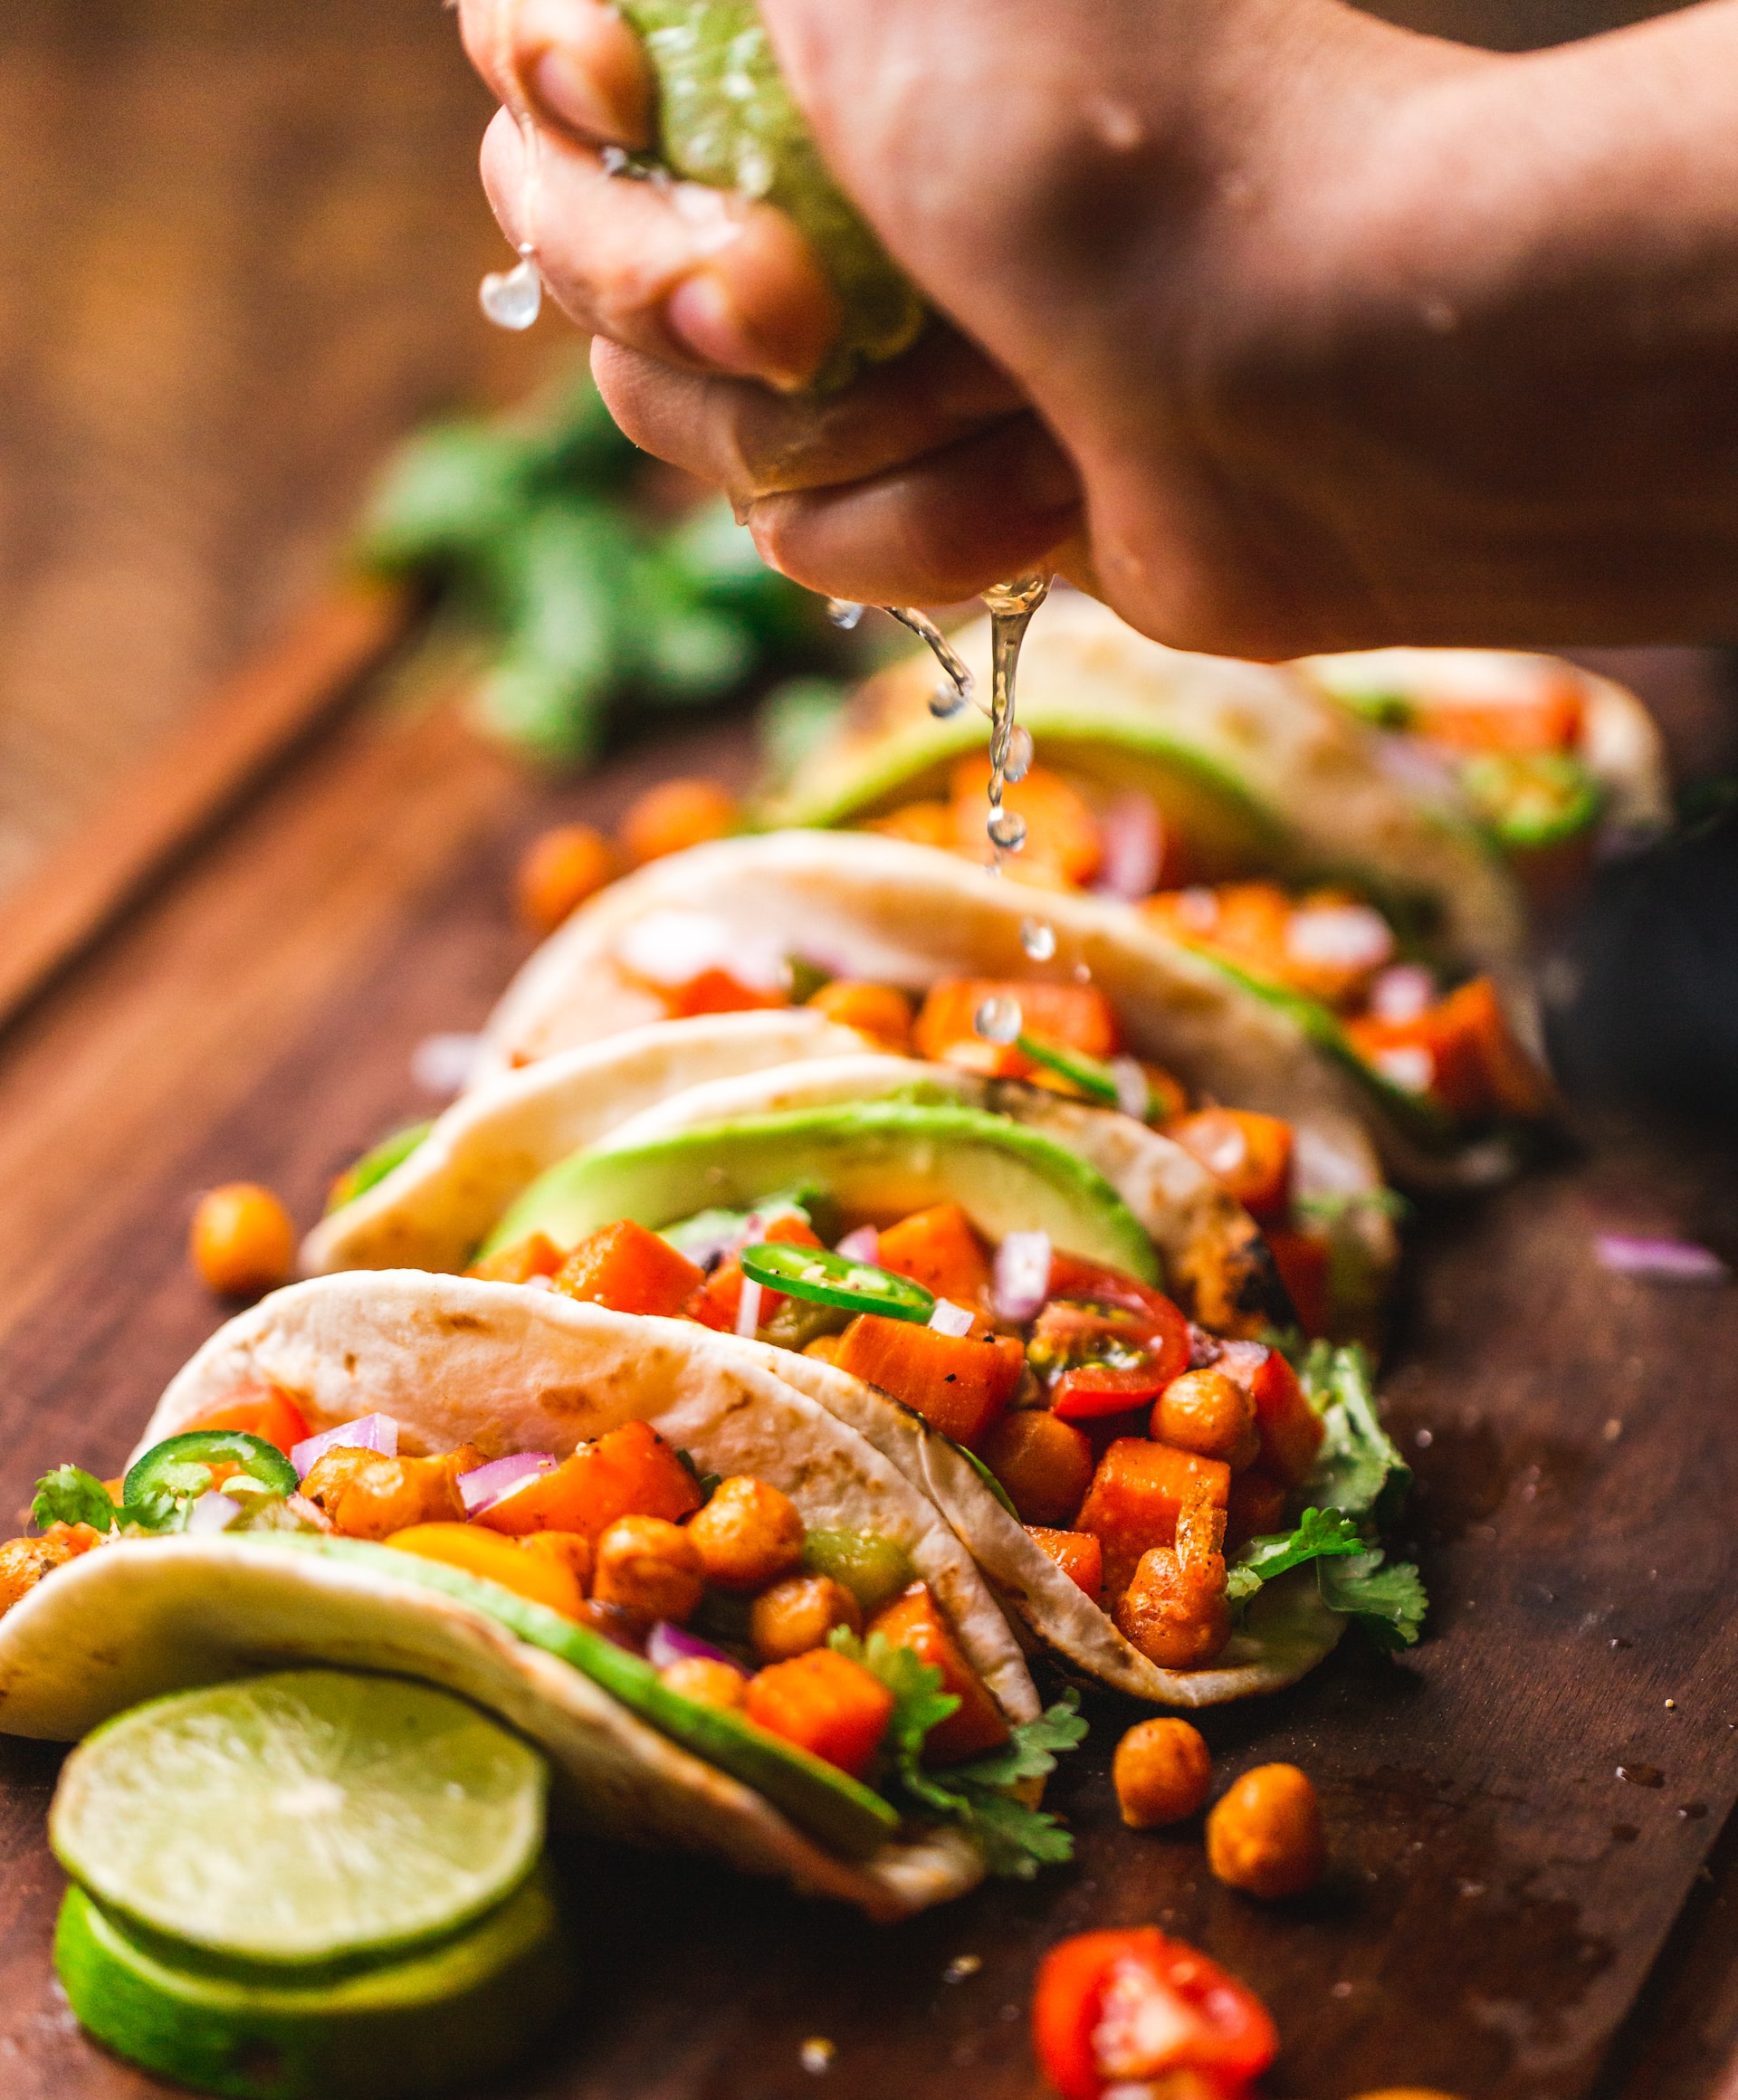 image of tacos as one of the top 9 things to do in mexico is cuisine